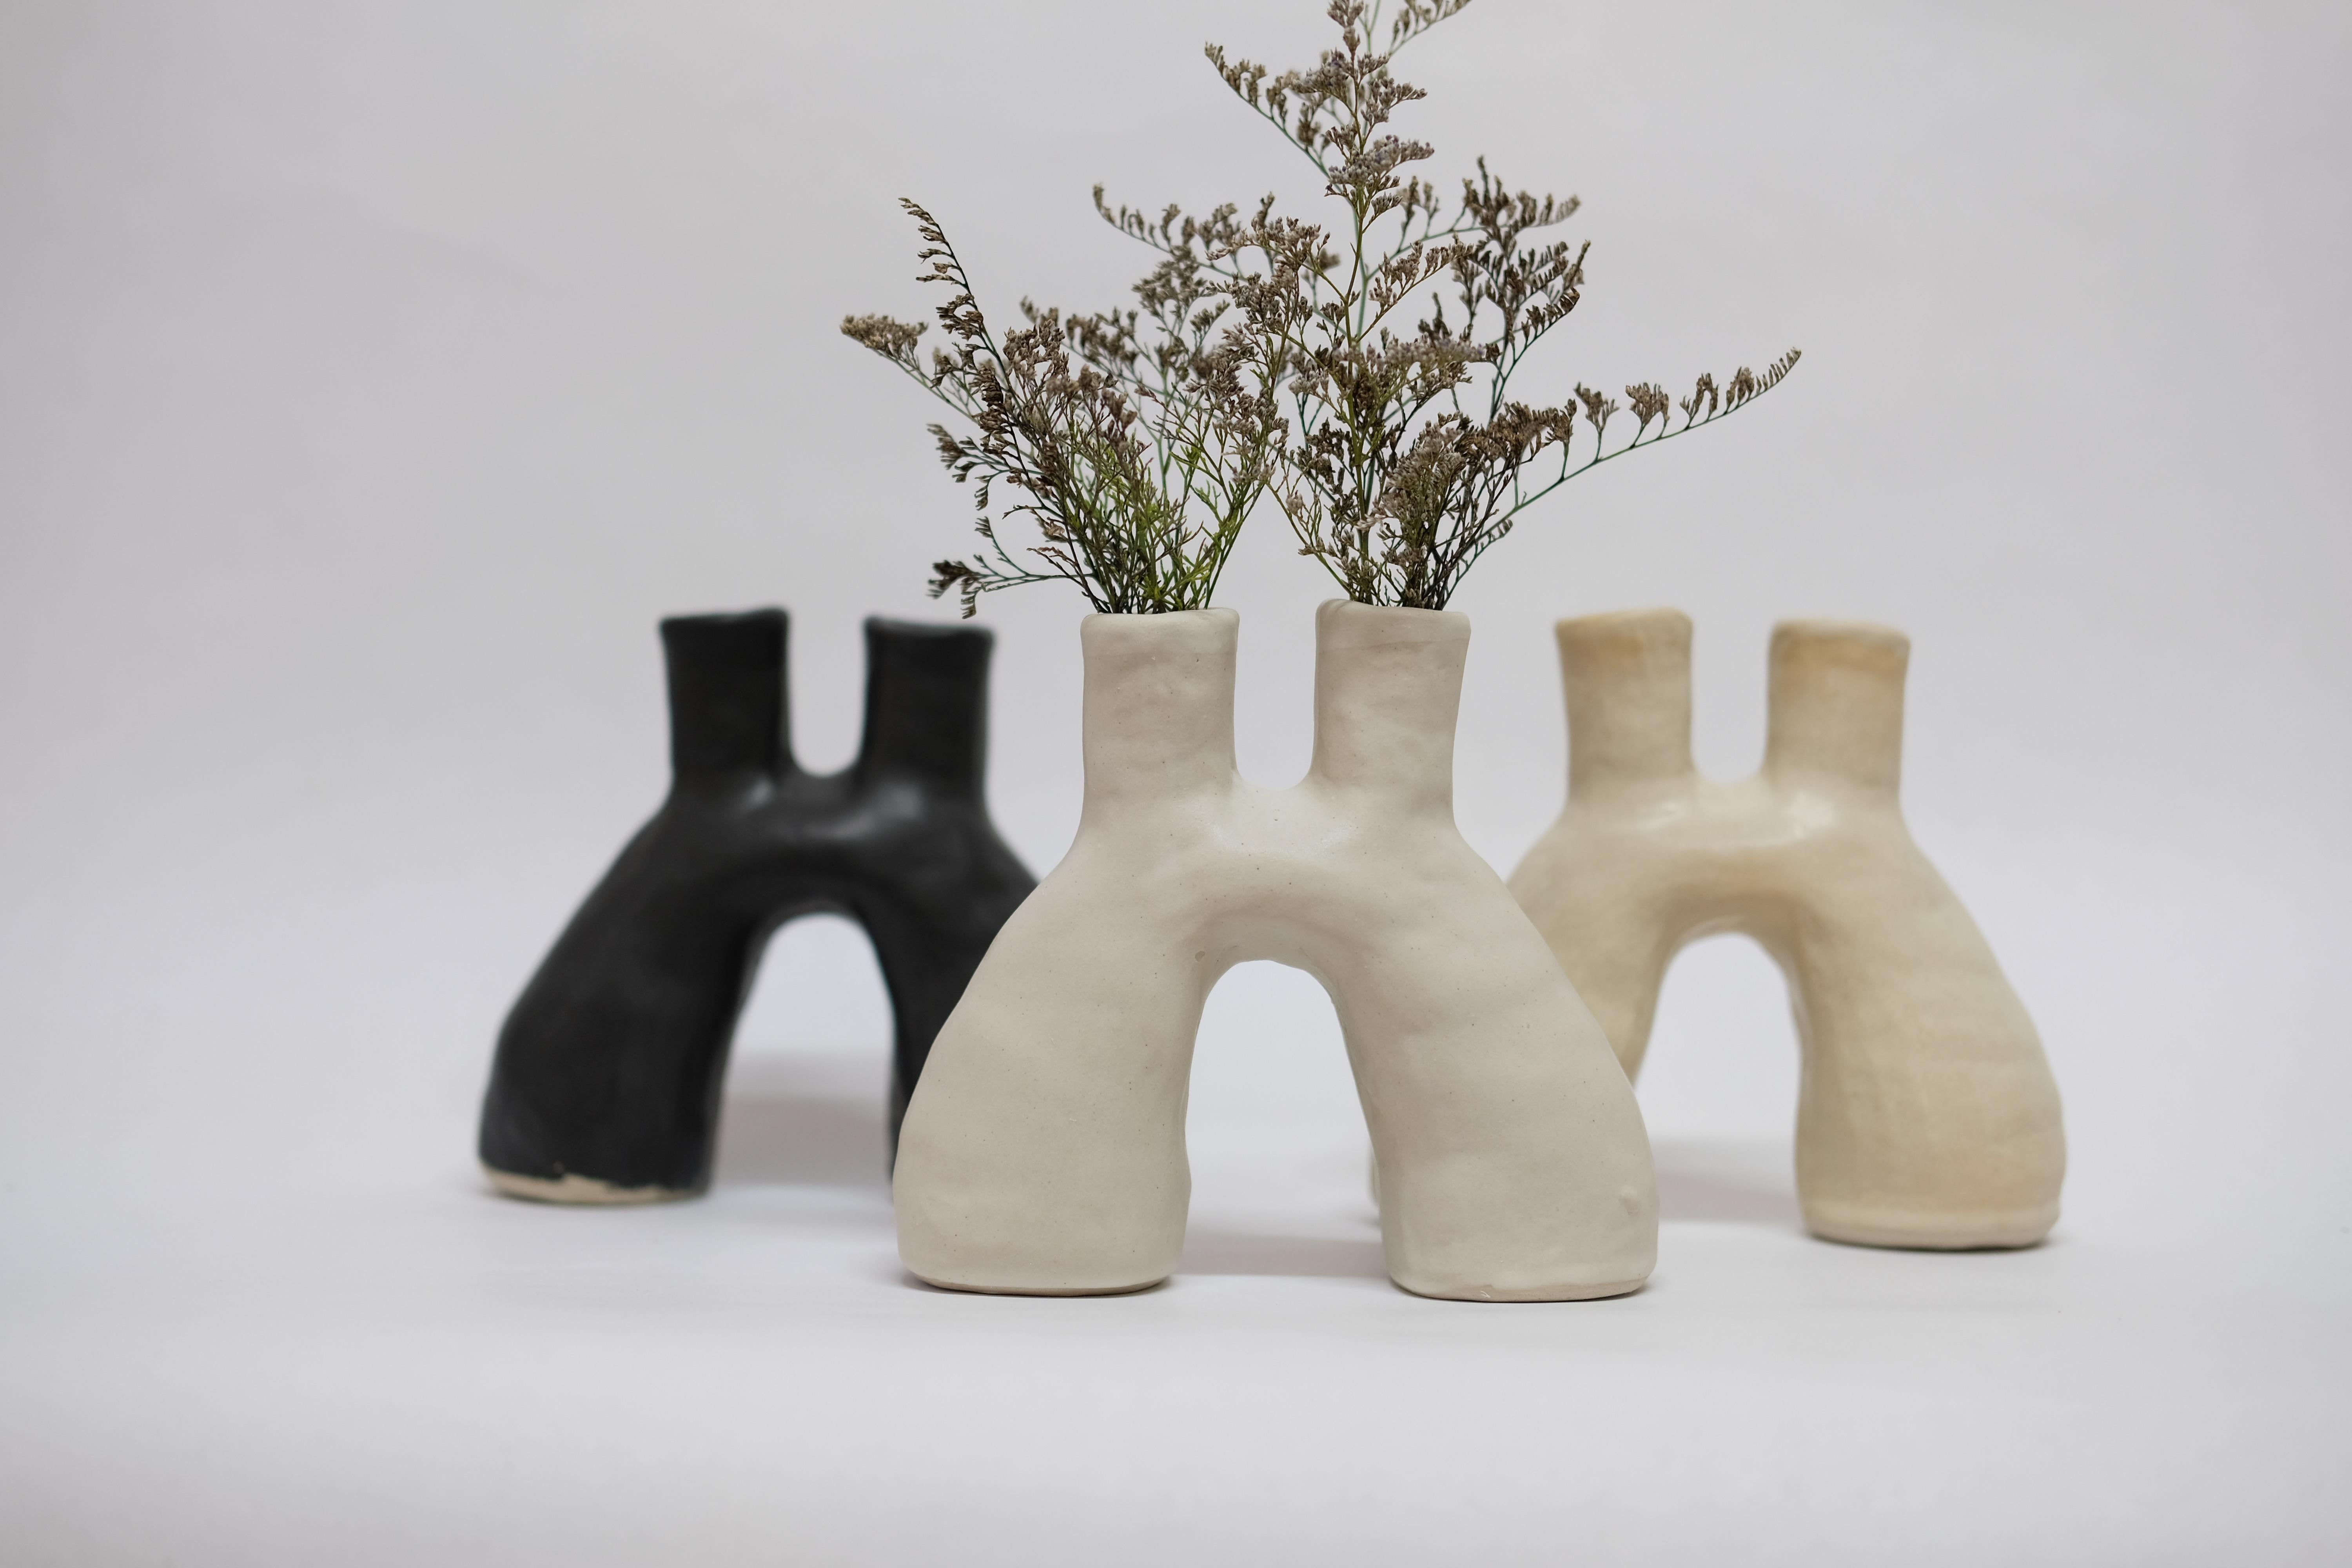 Set of 3 portal stoneware vases by Camila Apaez
One of a kind
Materials: Stoneware
Dimensions: 7 x 17 x 14 cm
Options: White bone, butter milk, stone sage.

This year has been shaped by the topographies of our homes and the uncertainty of our